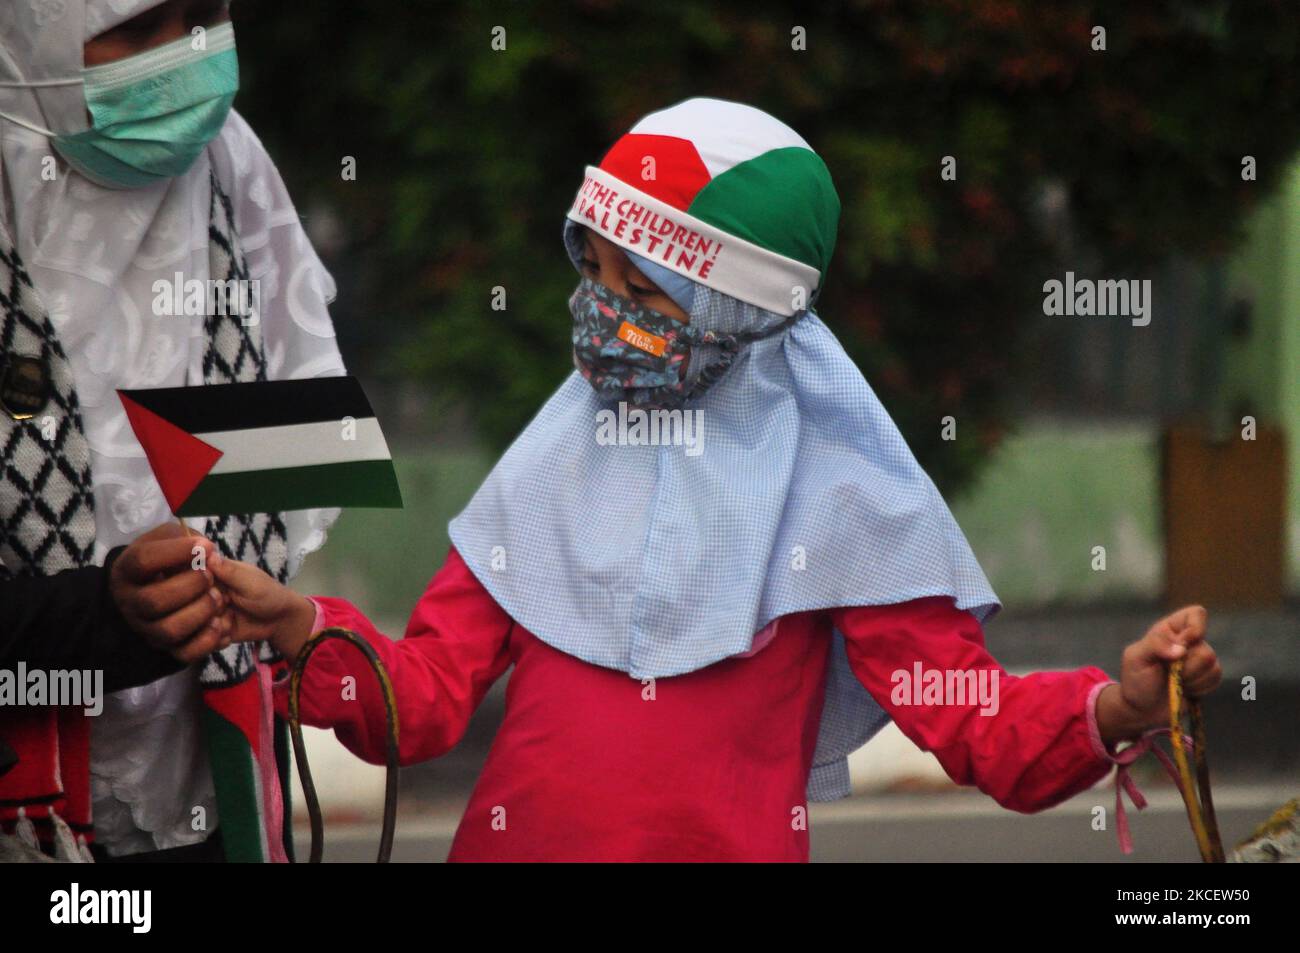 A mother gives a small Palestine flag to her child during a demonstration to defend the rights of the Palestine people against Israeli soldiers attacking the city square of Palu, Central Sulawesi Province, on May 18, 2021. Israeli soldiers' attacks on Palestine have resulted in hundreds the victims died and were injured, has provoked a lot of anger and solidarity from the Indonesian people. (Photo by Faldi Muhammad/NurPhoto) Stock Photo